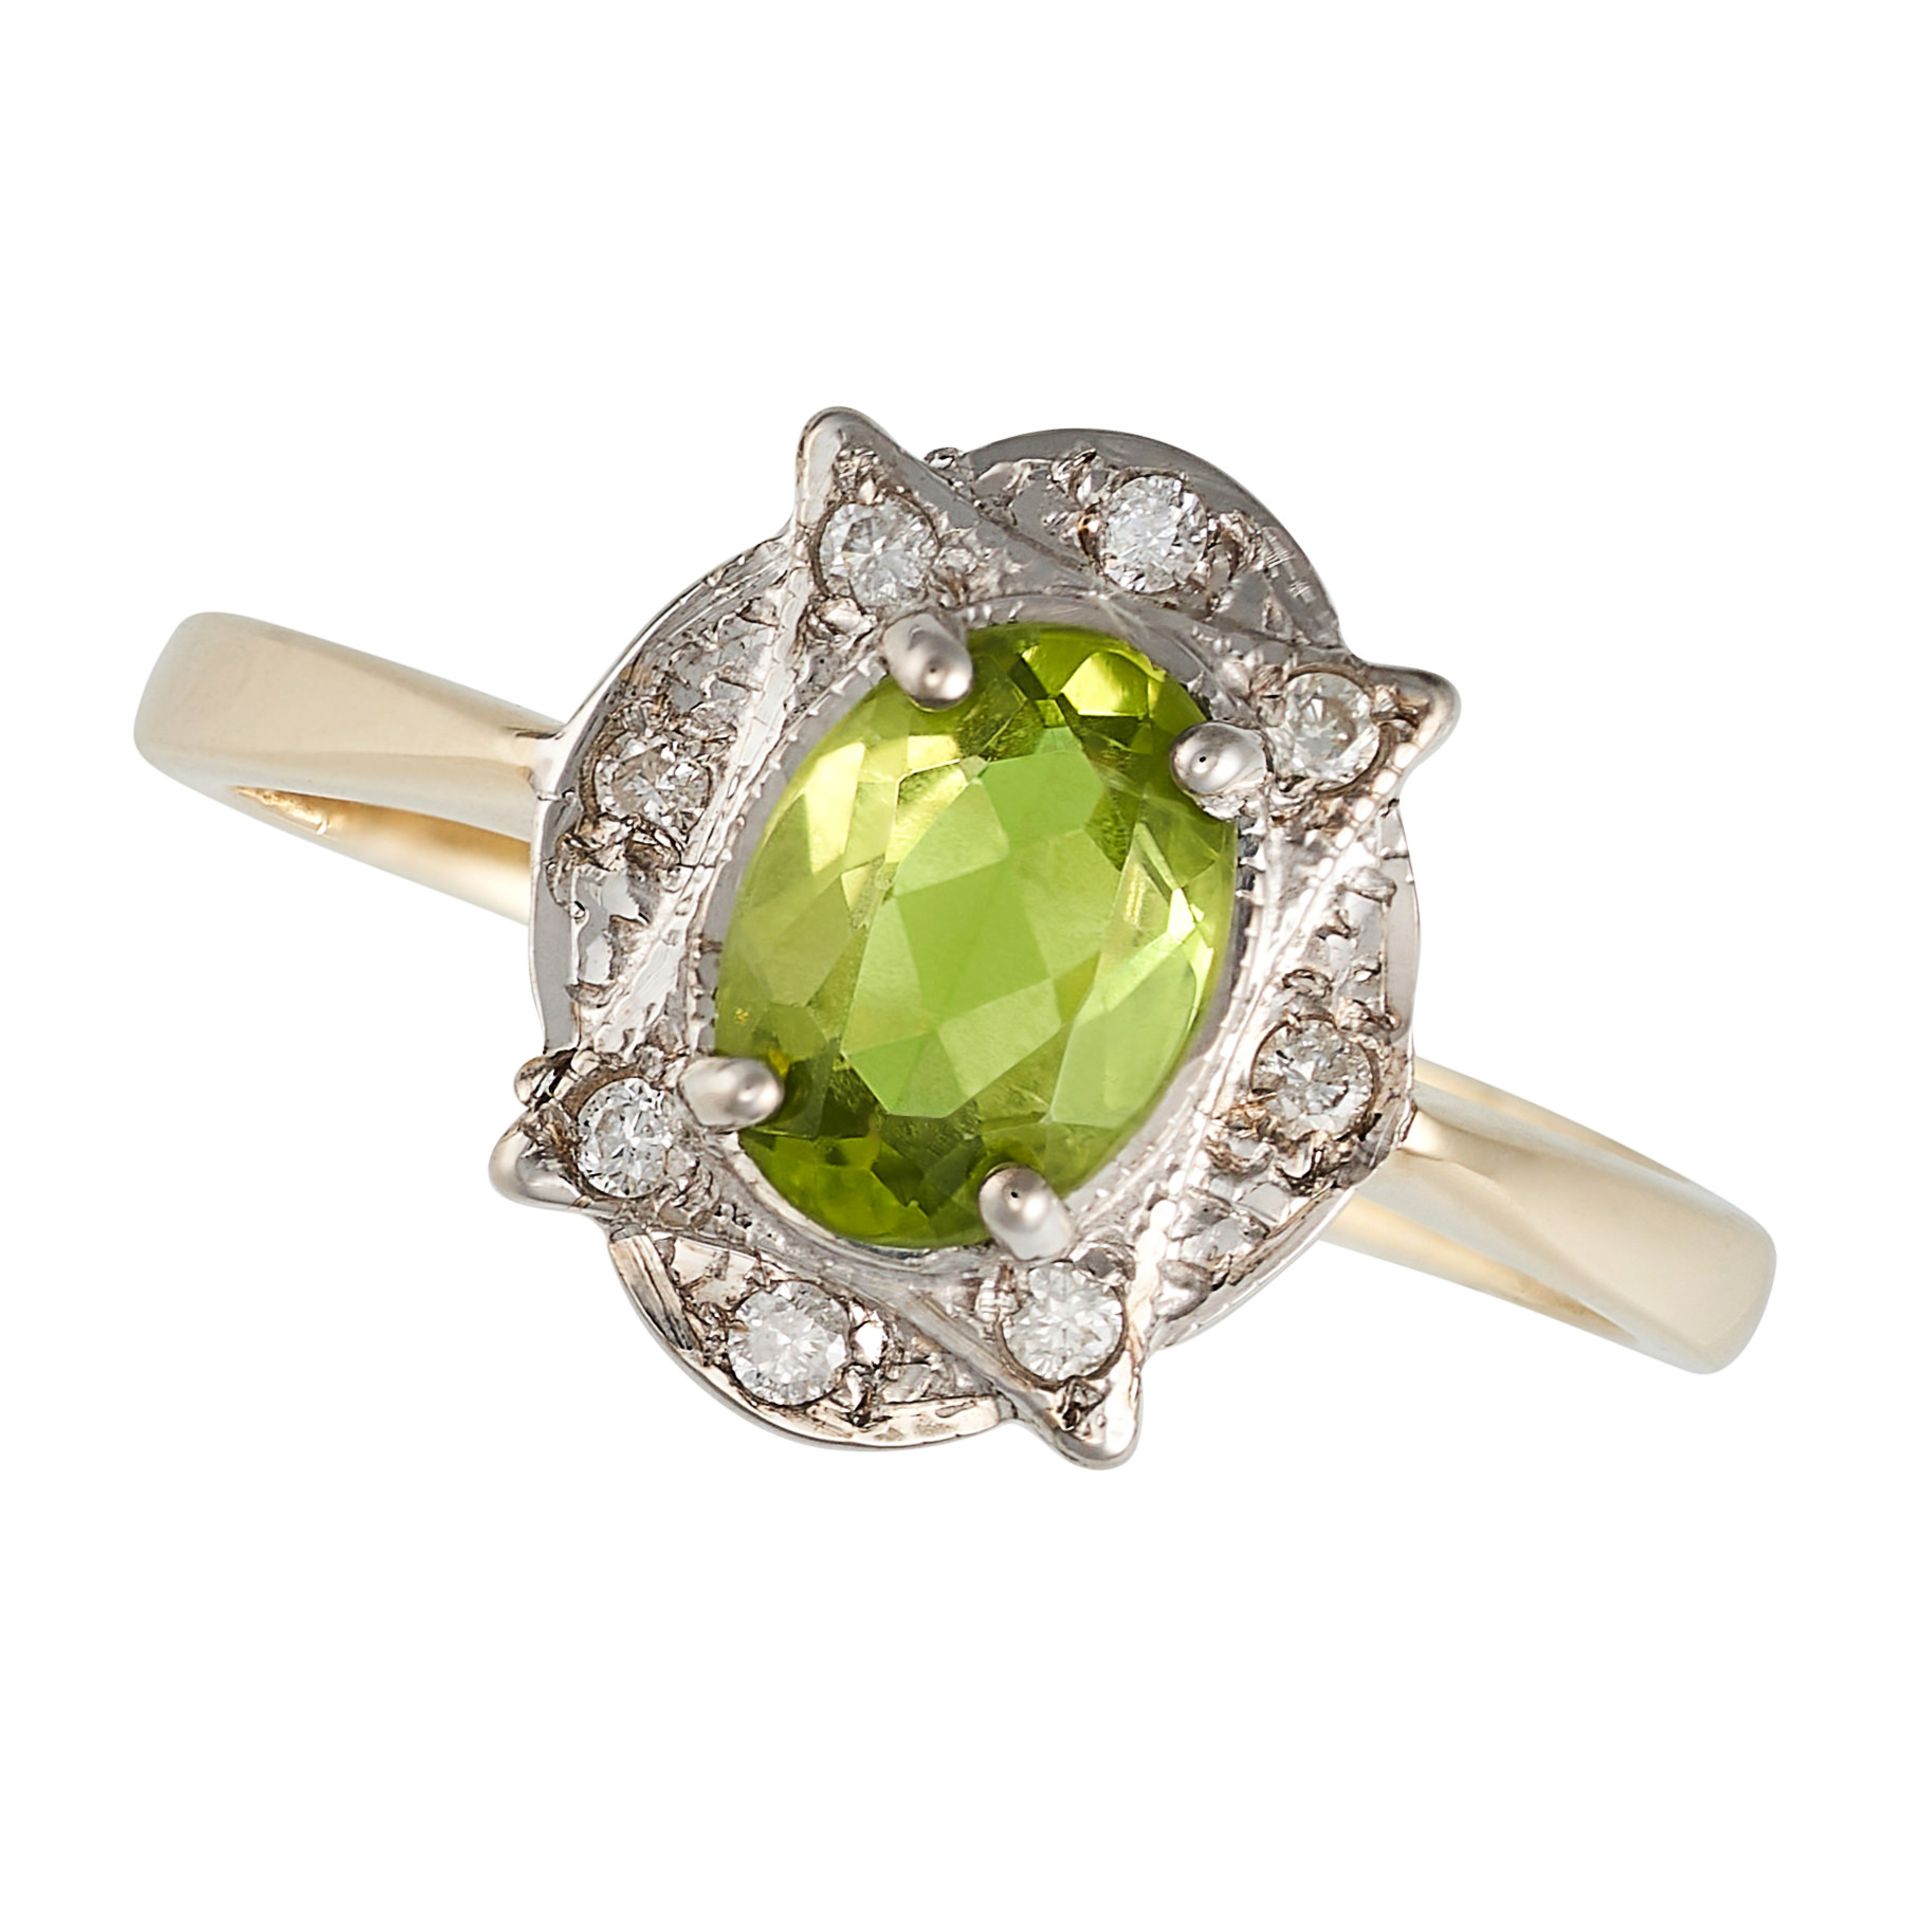 A PERIDOT AND DIAMOND RING in 9ct yellow and white gold, set with an oval cut peridot to a stylis...